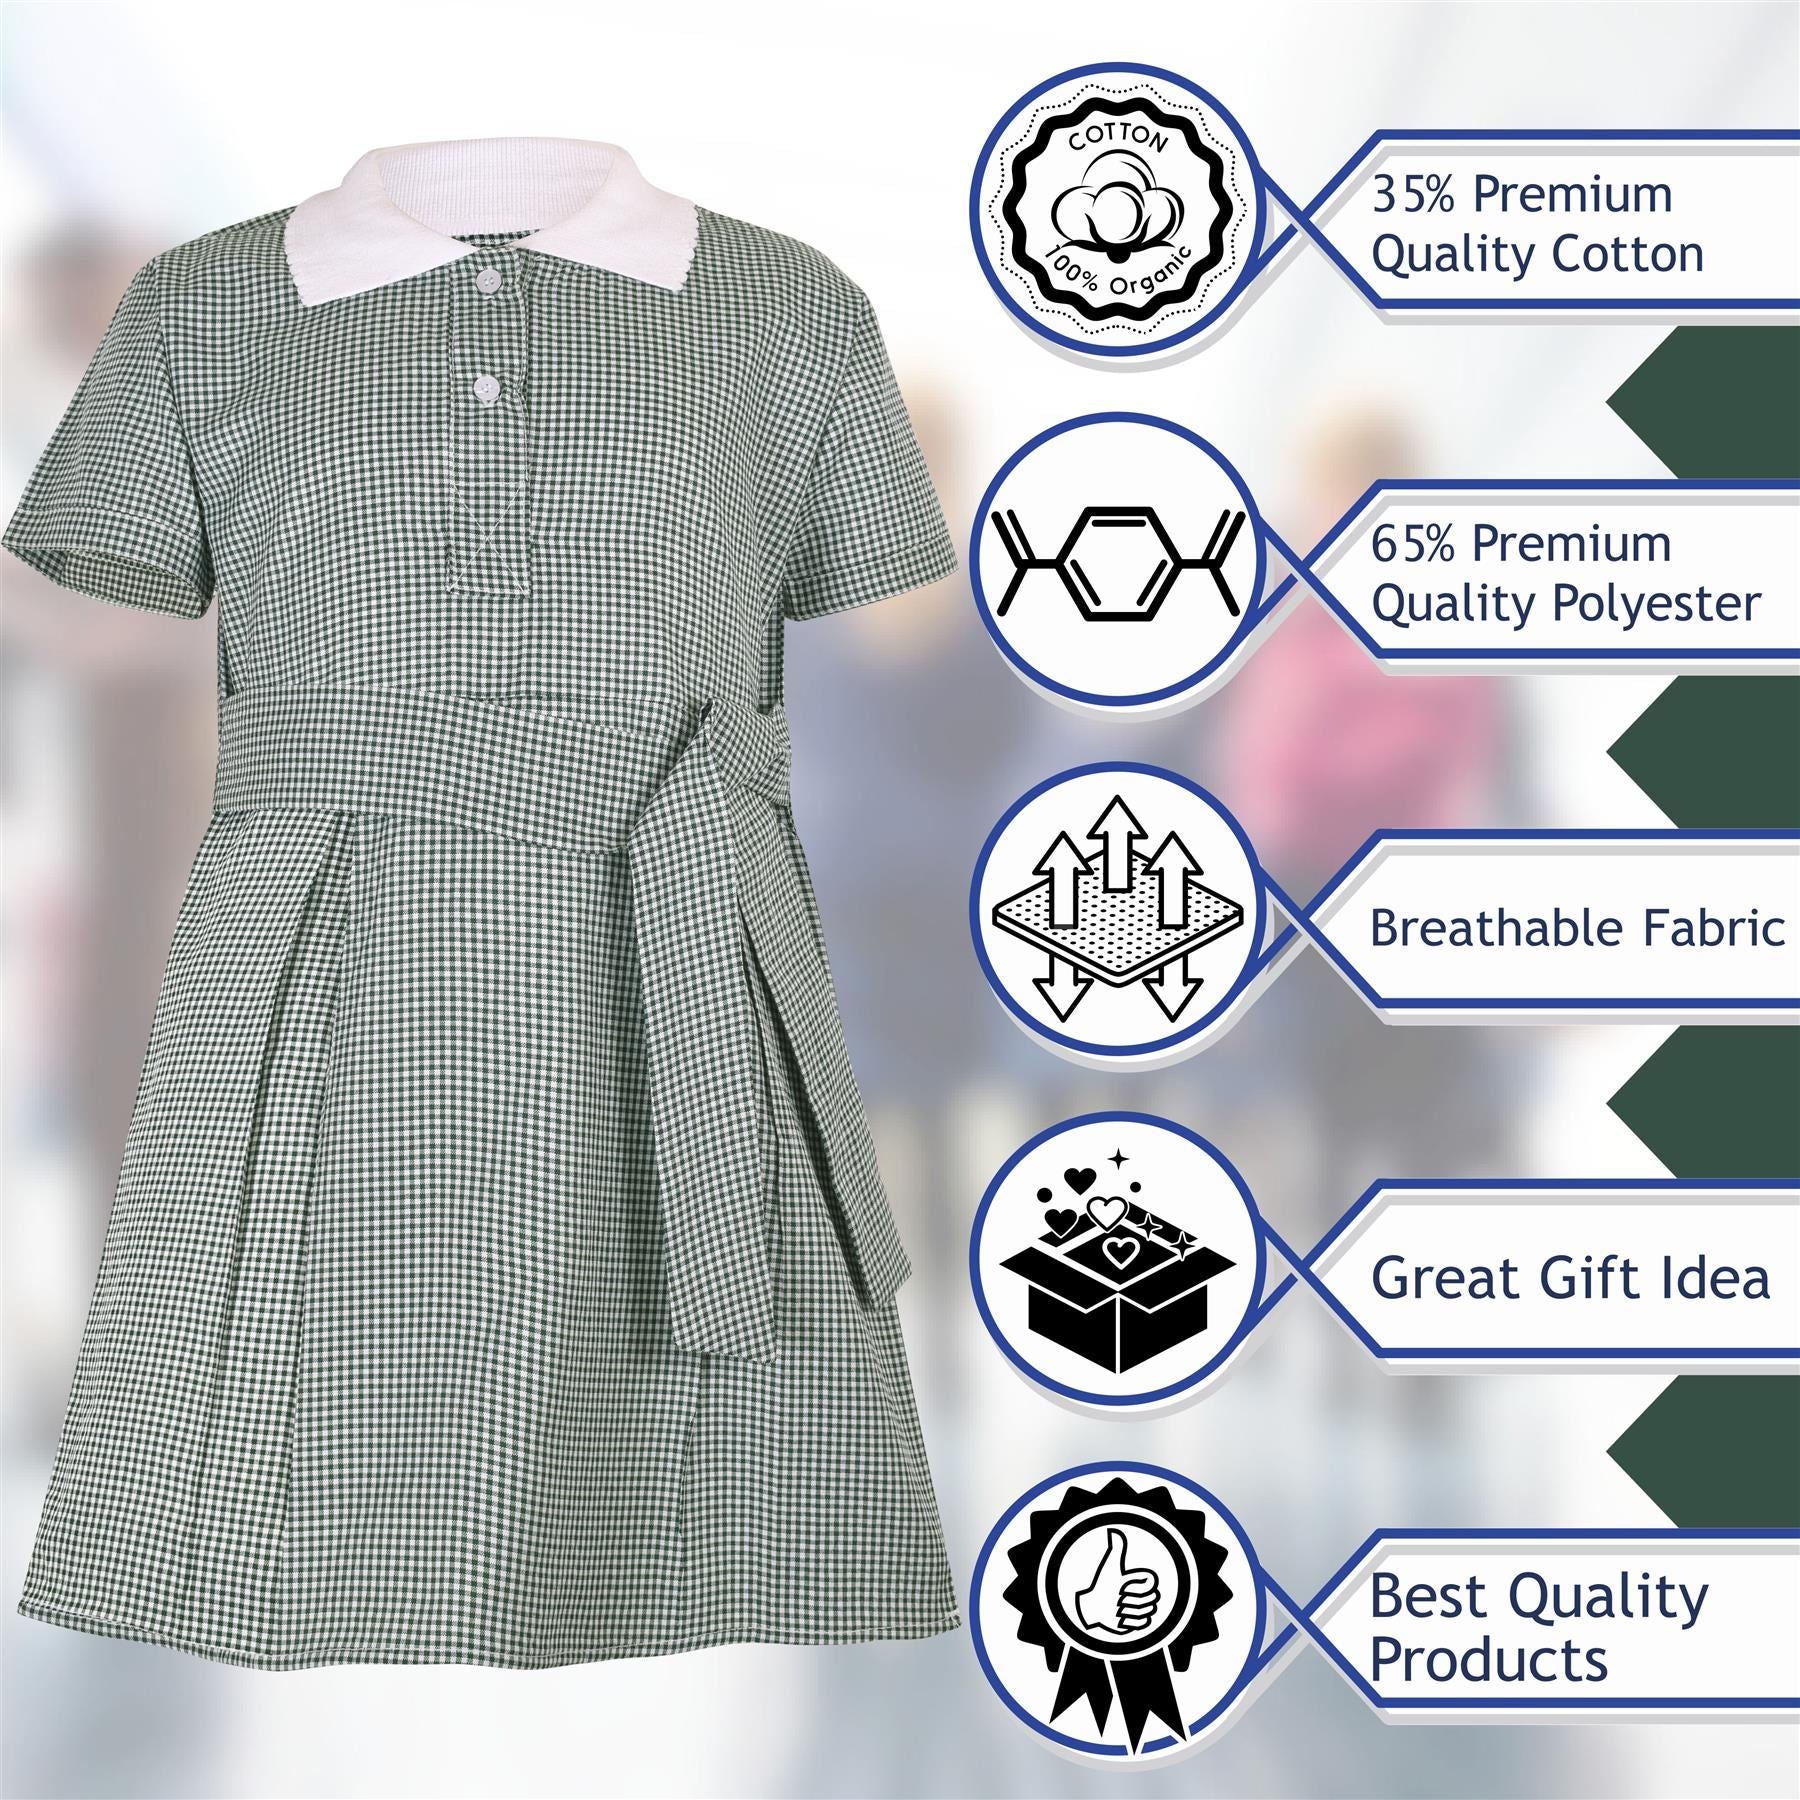 Kids Girls Gingham School Dress Check Belted Dresses With Matching Scrunchies